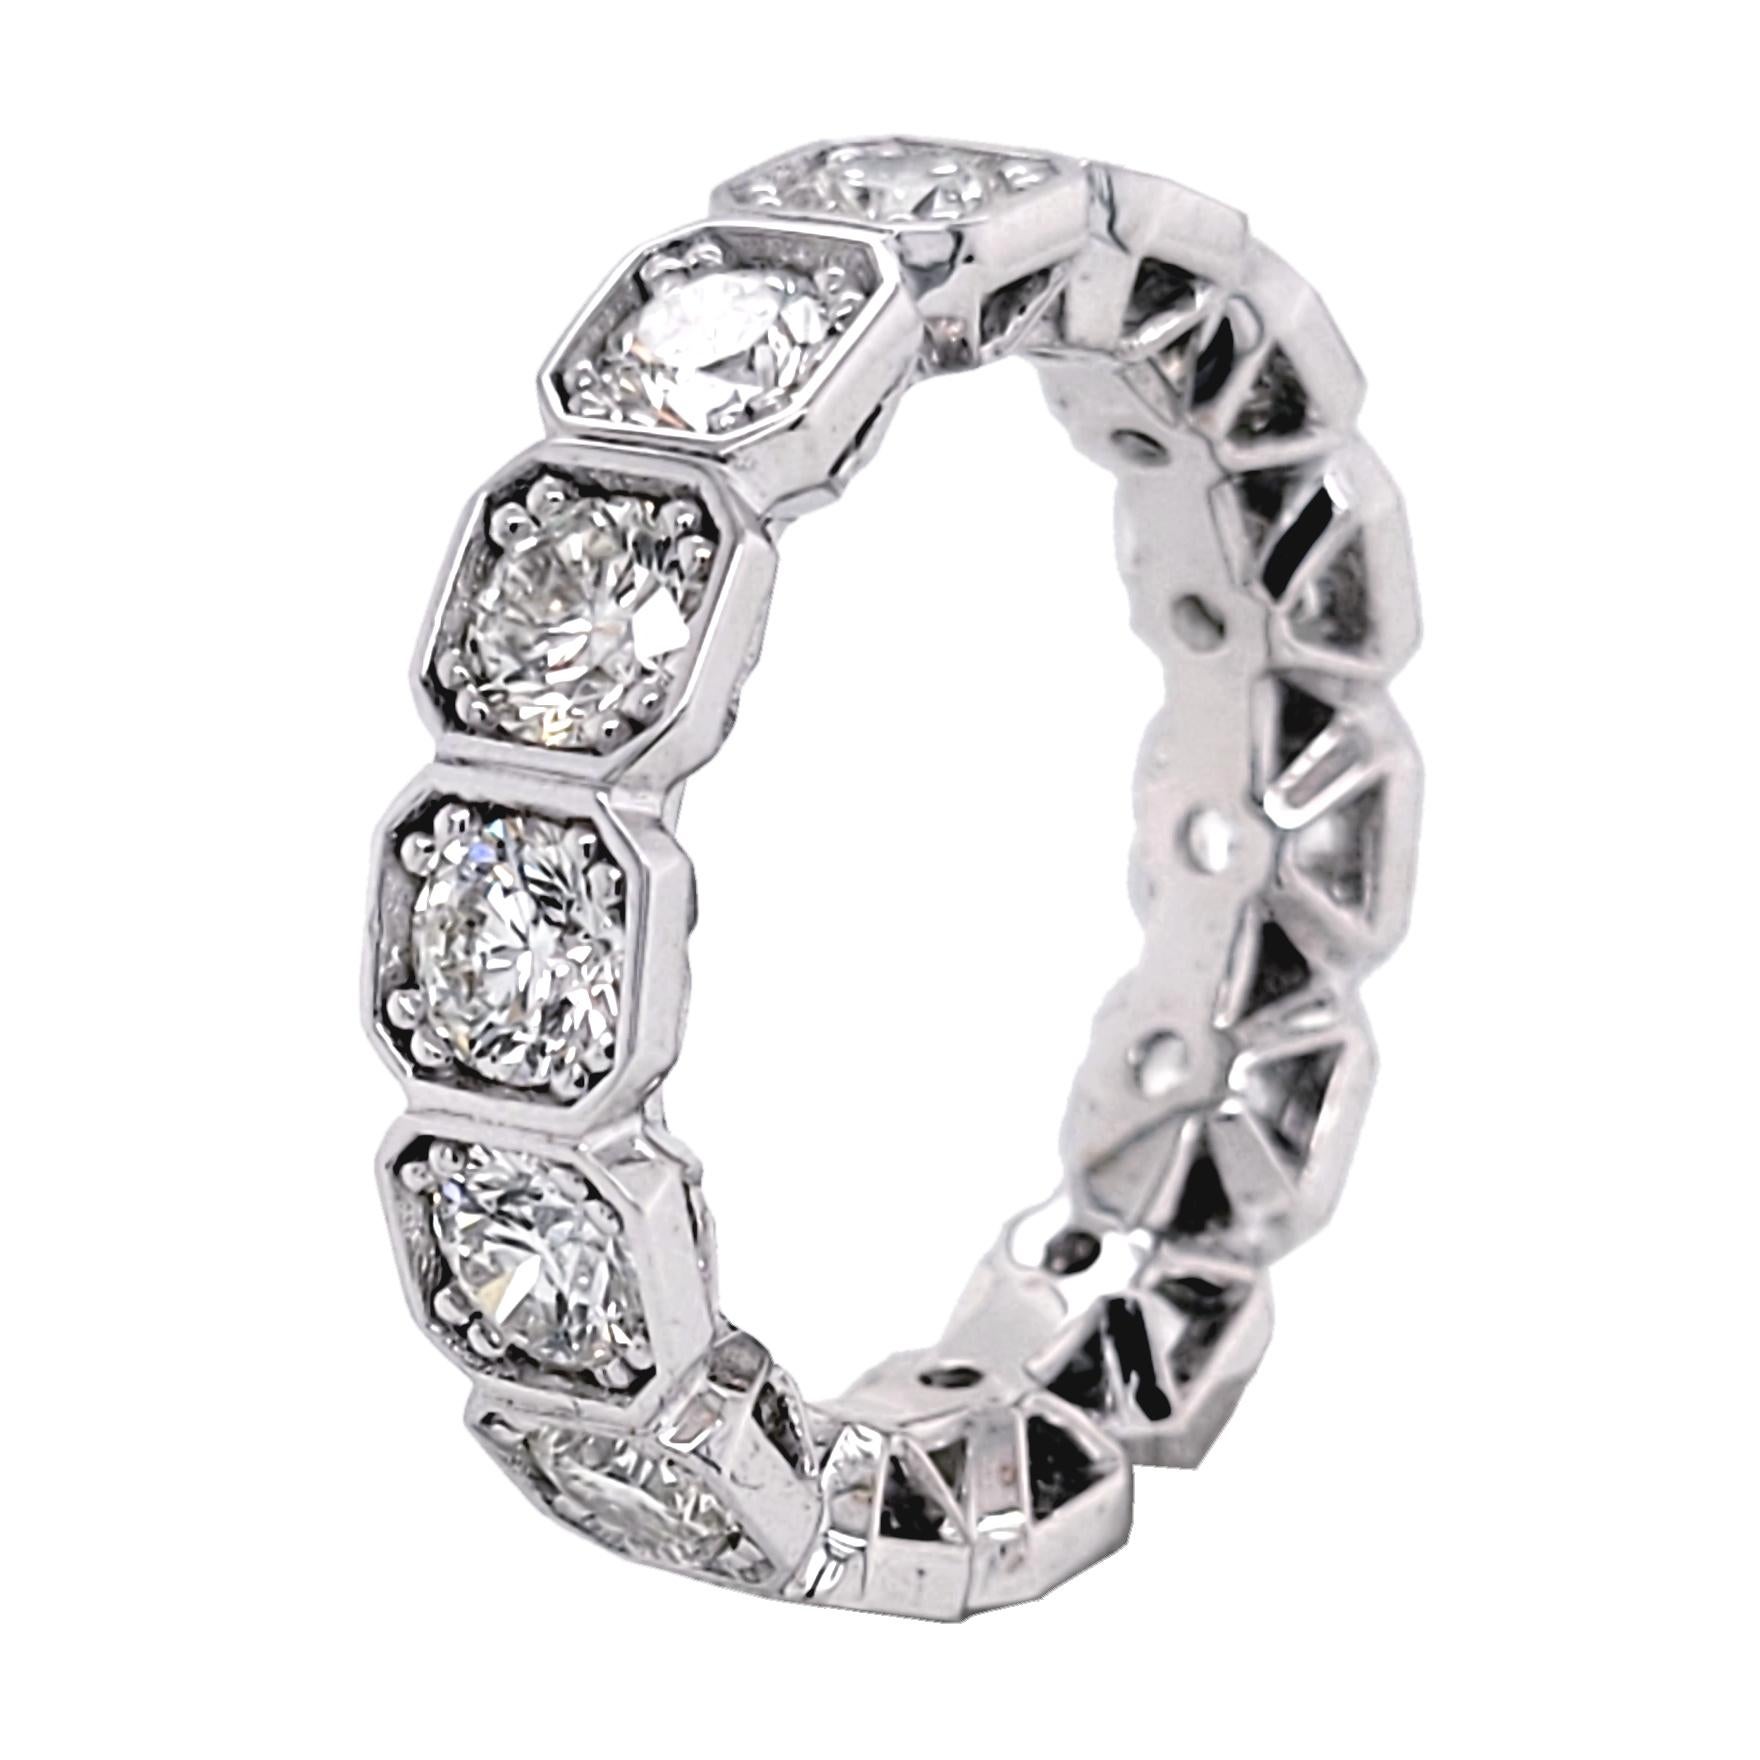 This beautiful Eternity Ring is made in 18 Karat Gold with 14 perfectly matched 3.9 mm Round Brilliant Diamonds Set in Hexagon Shaped segments.
Total Weight of diamonds: 3.18 Ct  SI/F-G
Total Weight of the Ring: 5.2 Gr 18K White Gold
Ring Size: 6.5